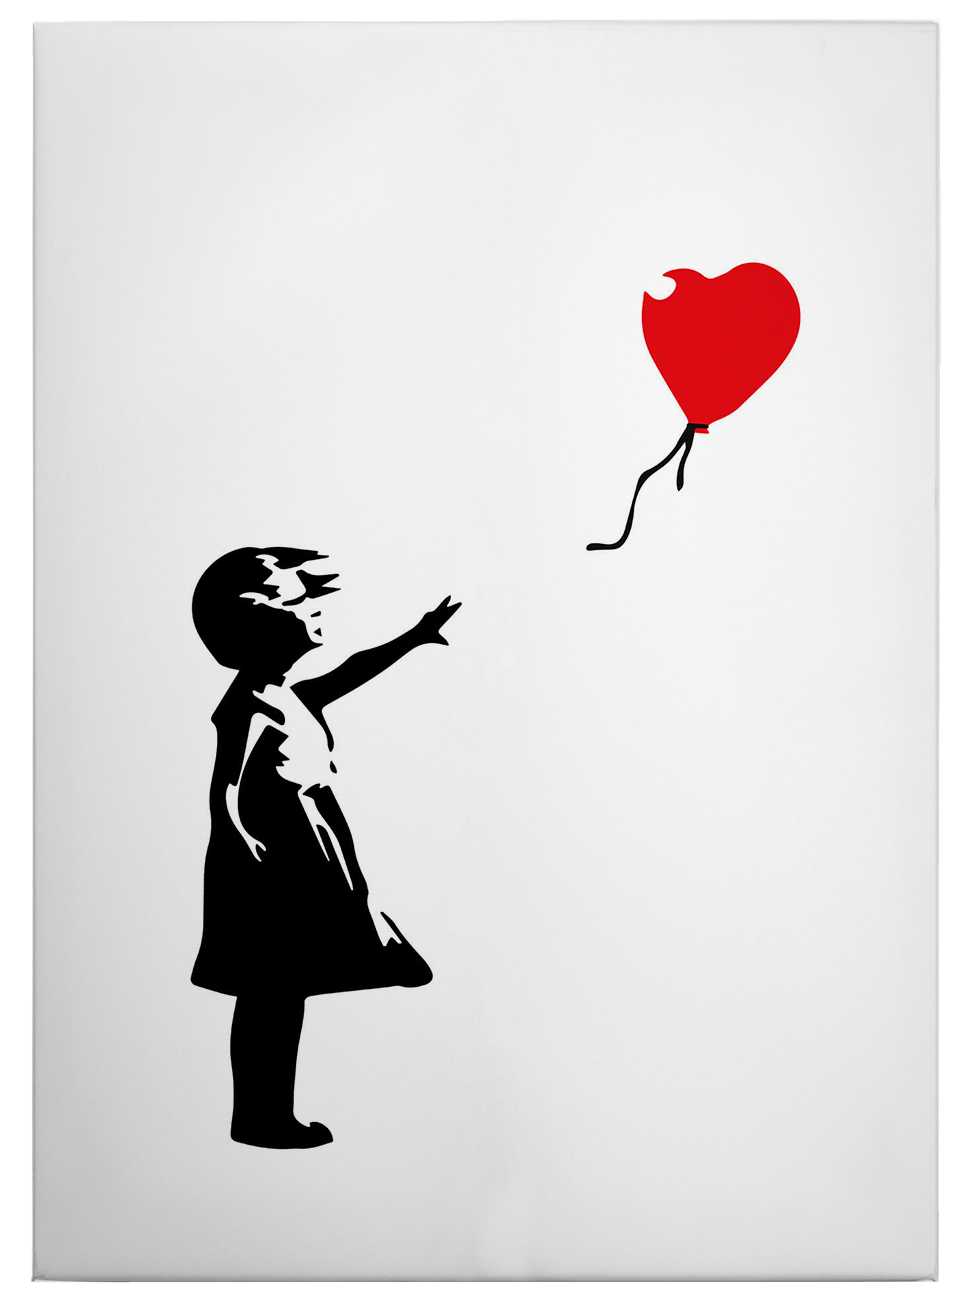             Canvas print "Girl with a red balloon" by Banksy
        